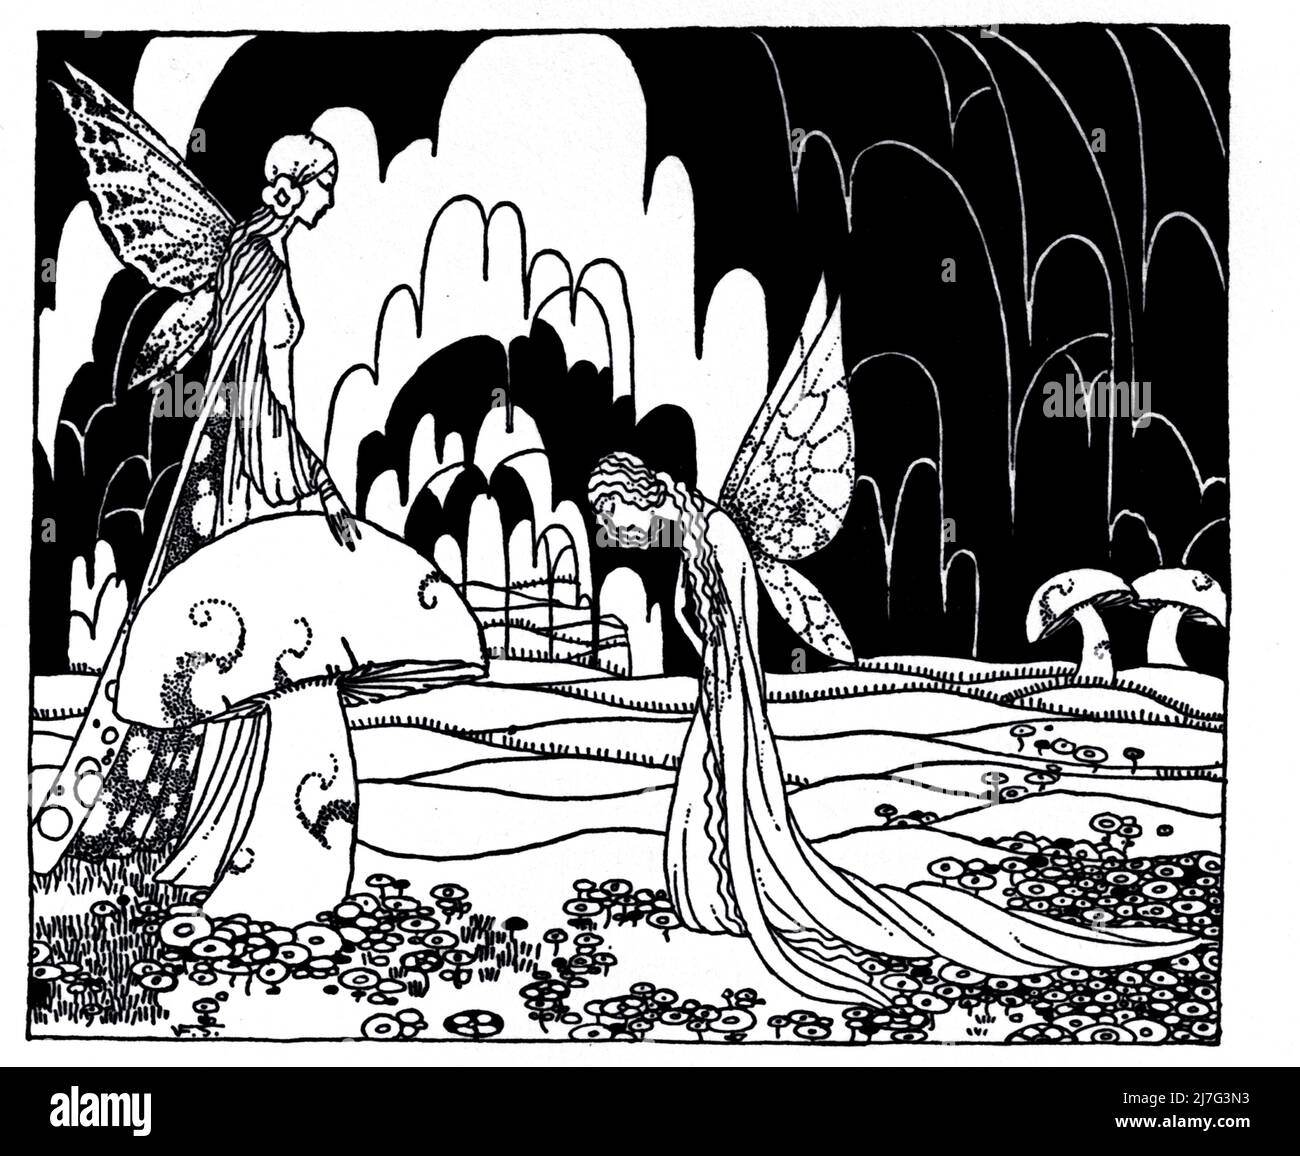 The fairy must give herself up to the queen and lose her power for eight days from the story PRINCESS ROSETTE from the book ' Old French fairy tales ' by comtesse de Ségur, Sophie, 1799-1874; and illustrated by Virginia Frances Sterrett. Published in Philadelphia, by The Penn publishing company 1920. A wonderful book with 5 timeless French fairy tales magnificently illustrated with 8 beautiful and dramatic full page color and many black and white drawings by Virginia Frances Sterrett. 'Done when she was only 19 years of age, this was Sterrett's (Chicago born) first book, Stock Photo